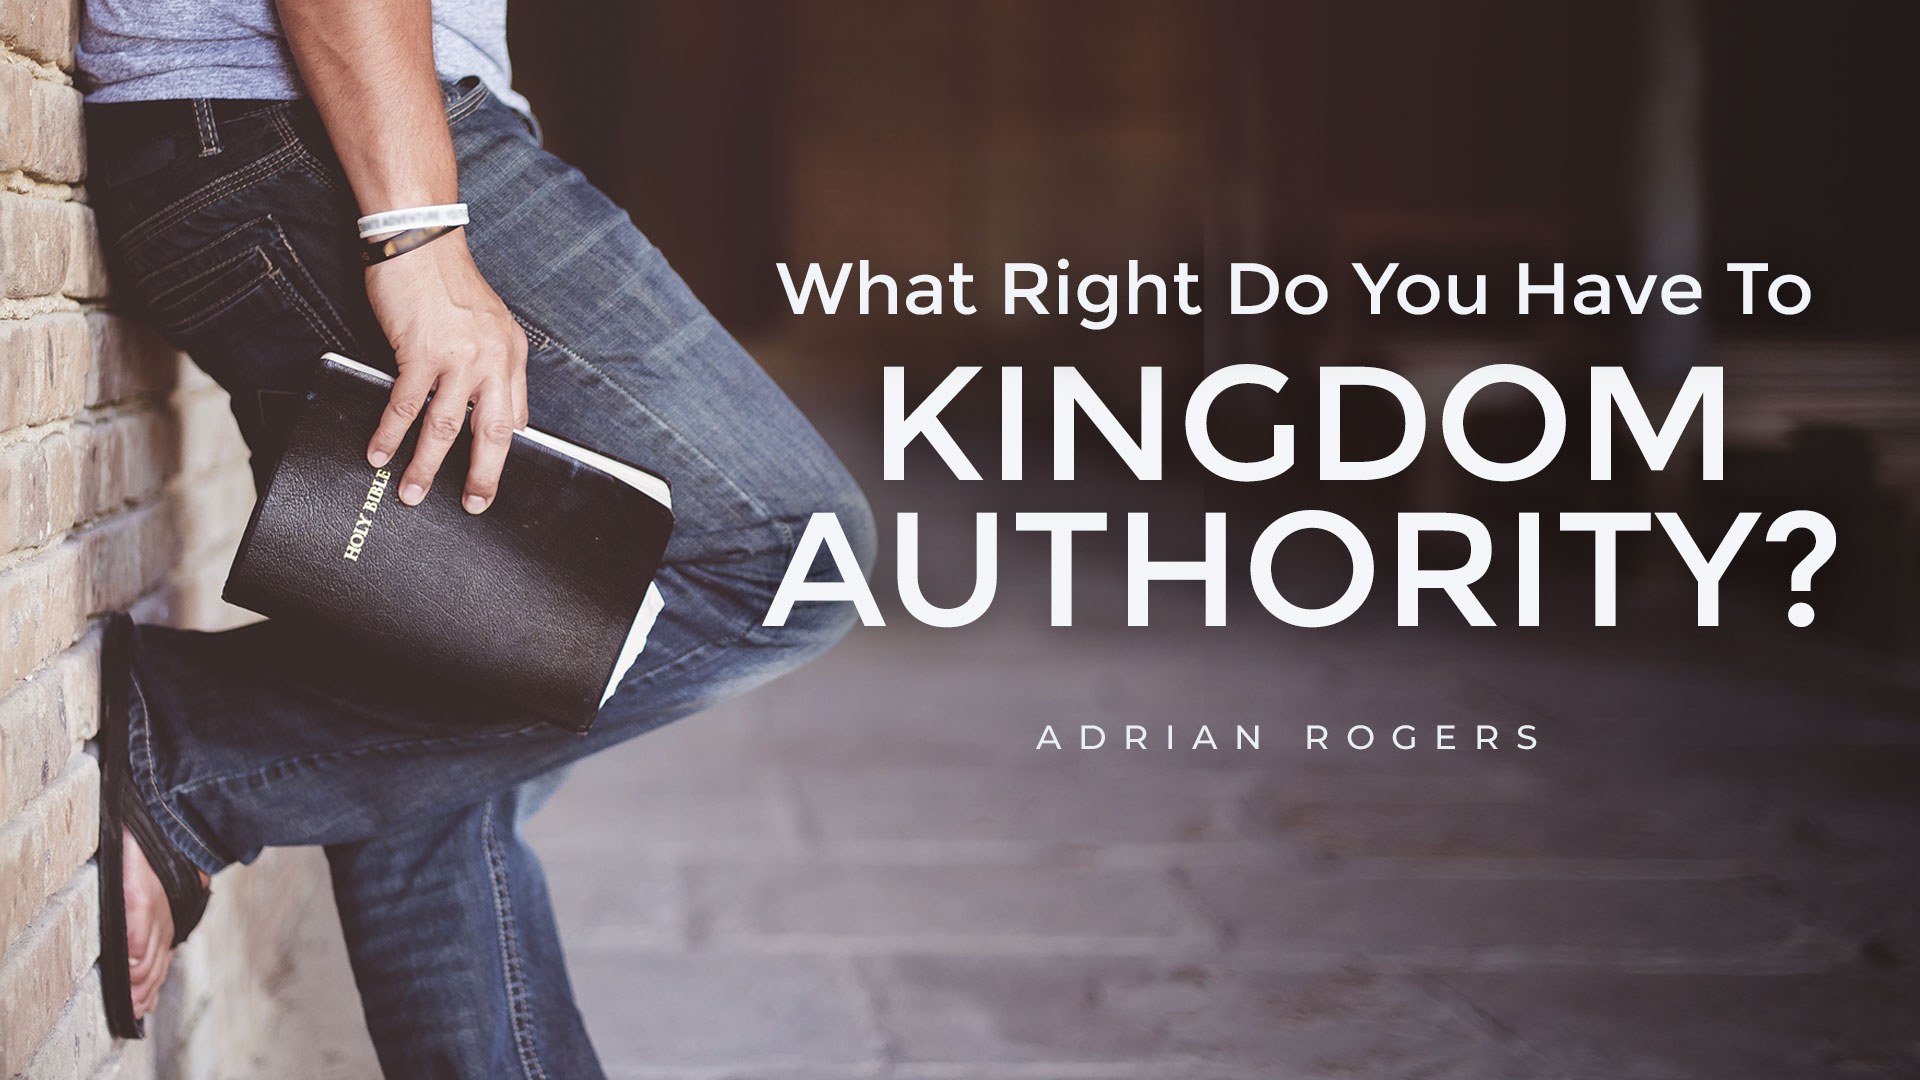 What Right Do You Have to Kingdom Authority 1920x1080